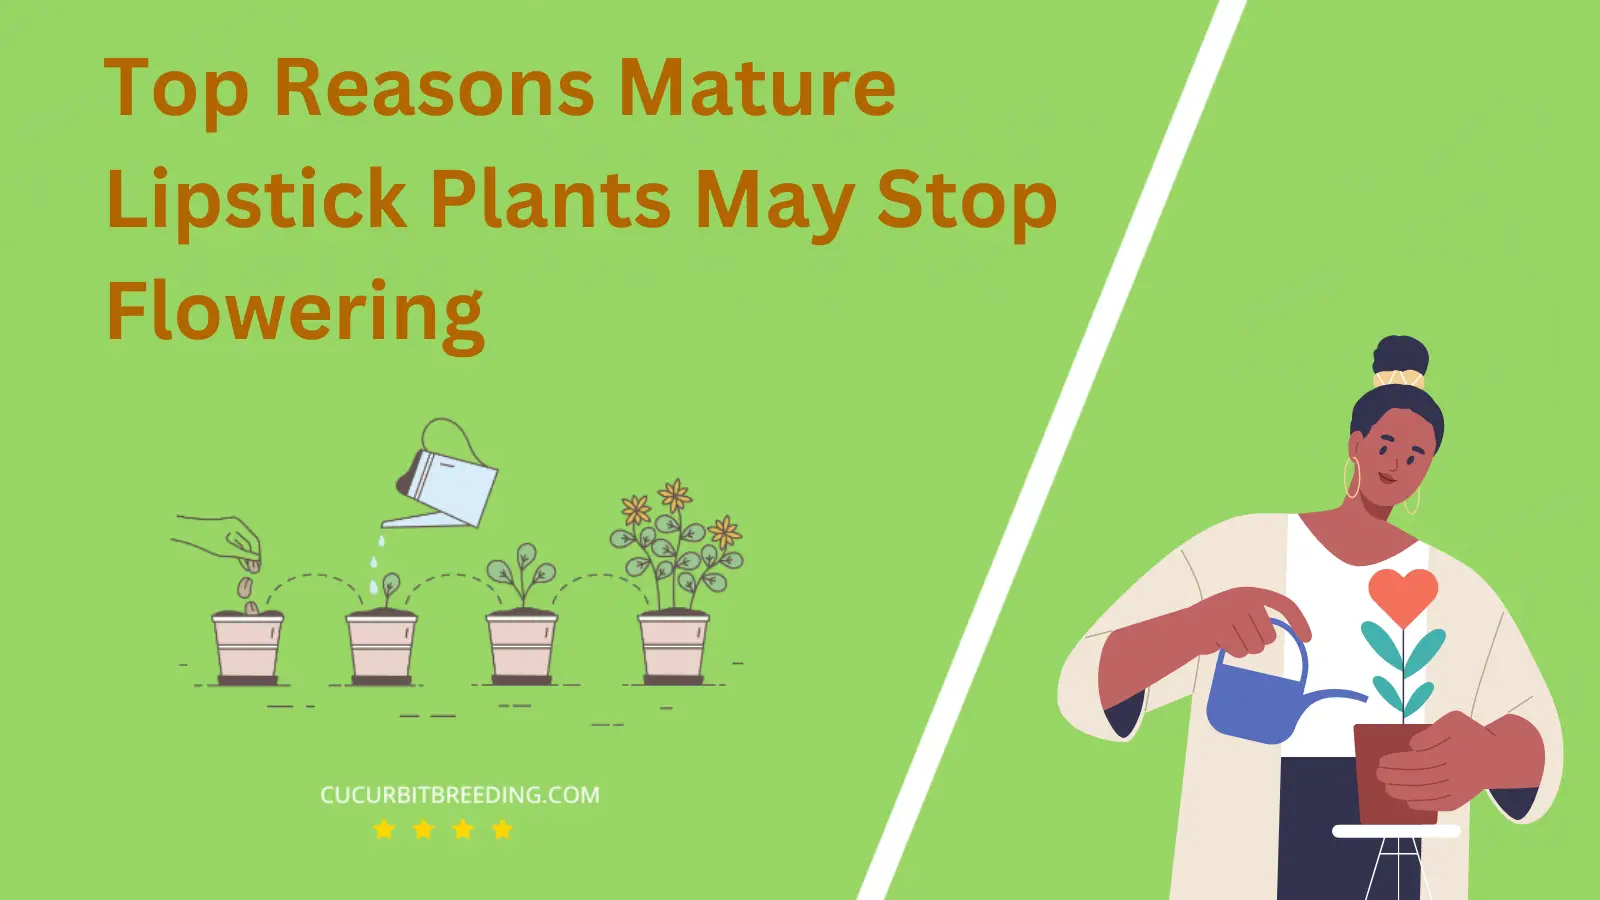 Top Reasons Mature Lipstick Plants May Stop Flowering